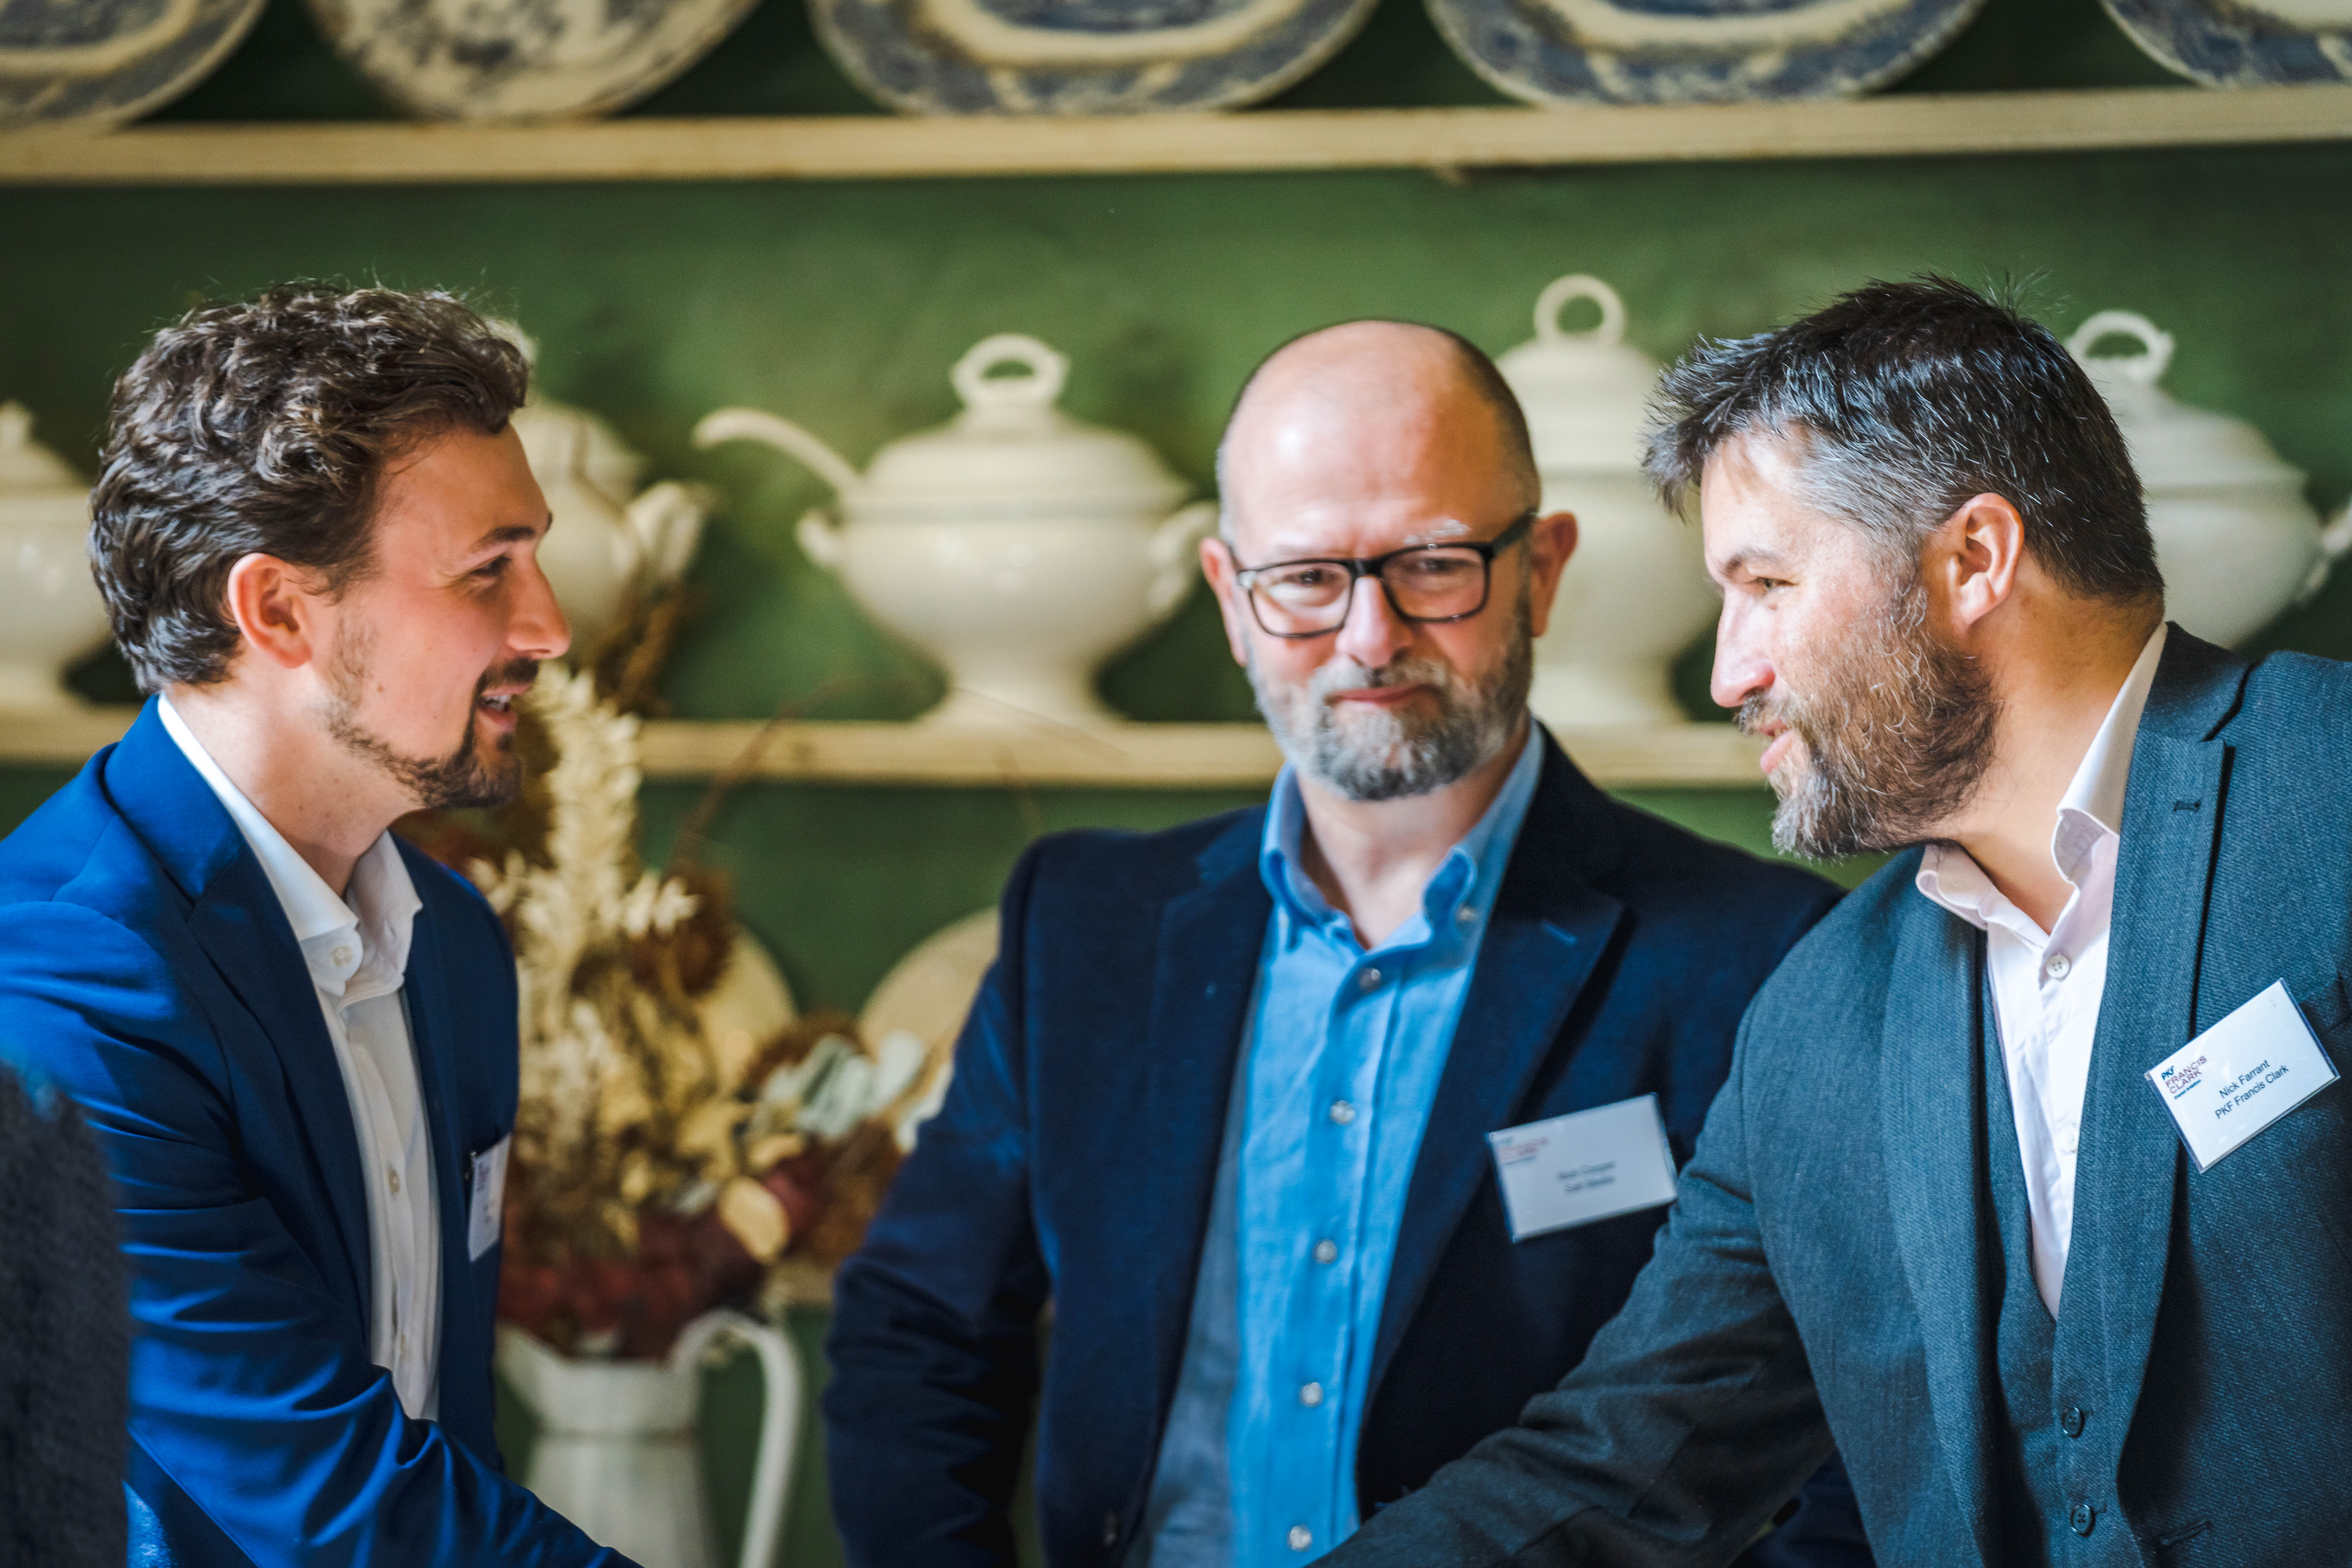 Nick Farrant speaking to Alex Rodda and Nick Cooper at the Food & Drink Sustainability Roundtable.